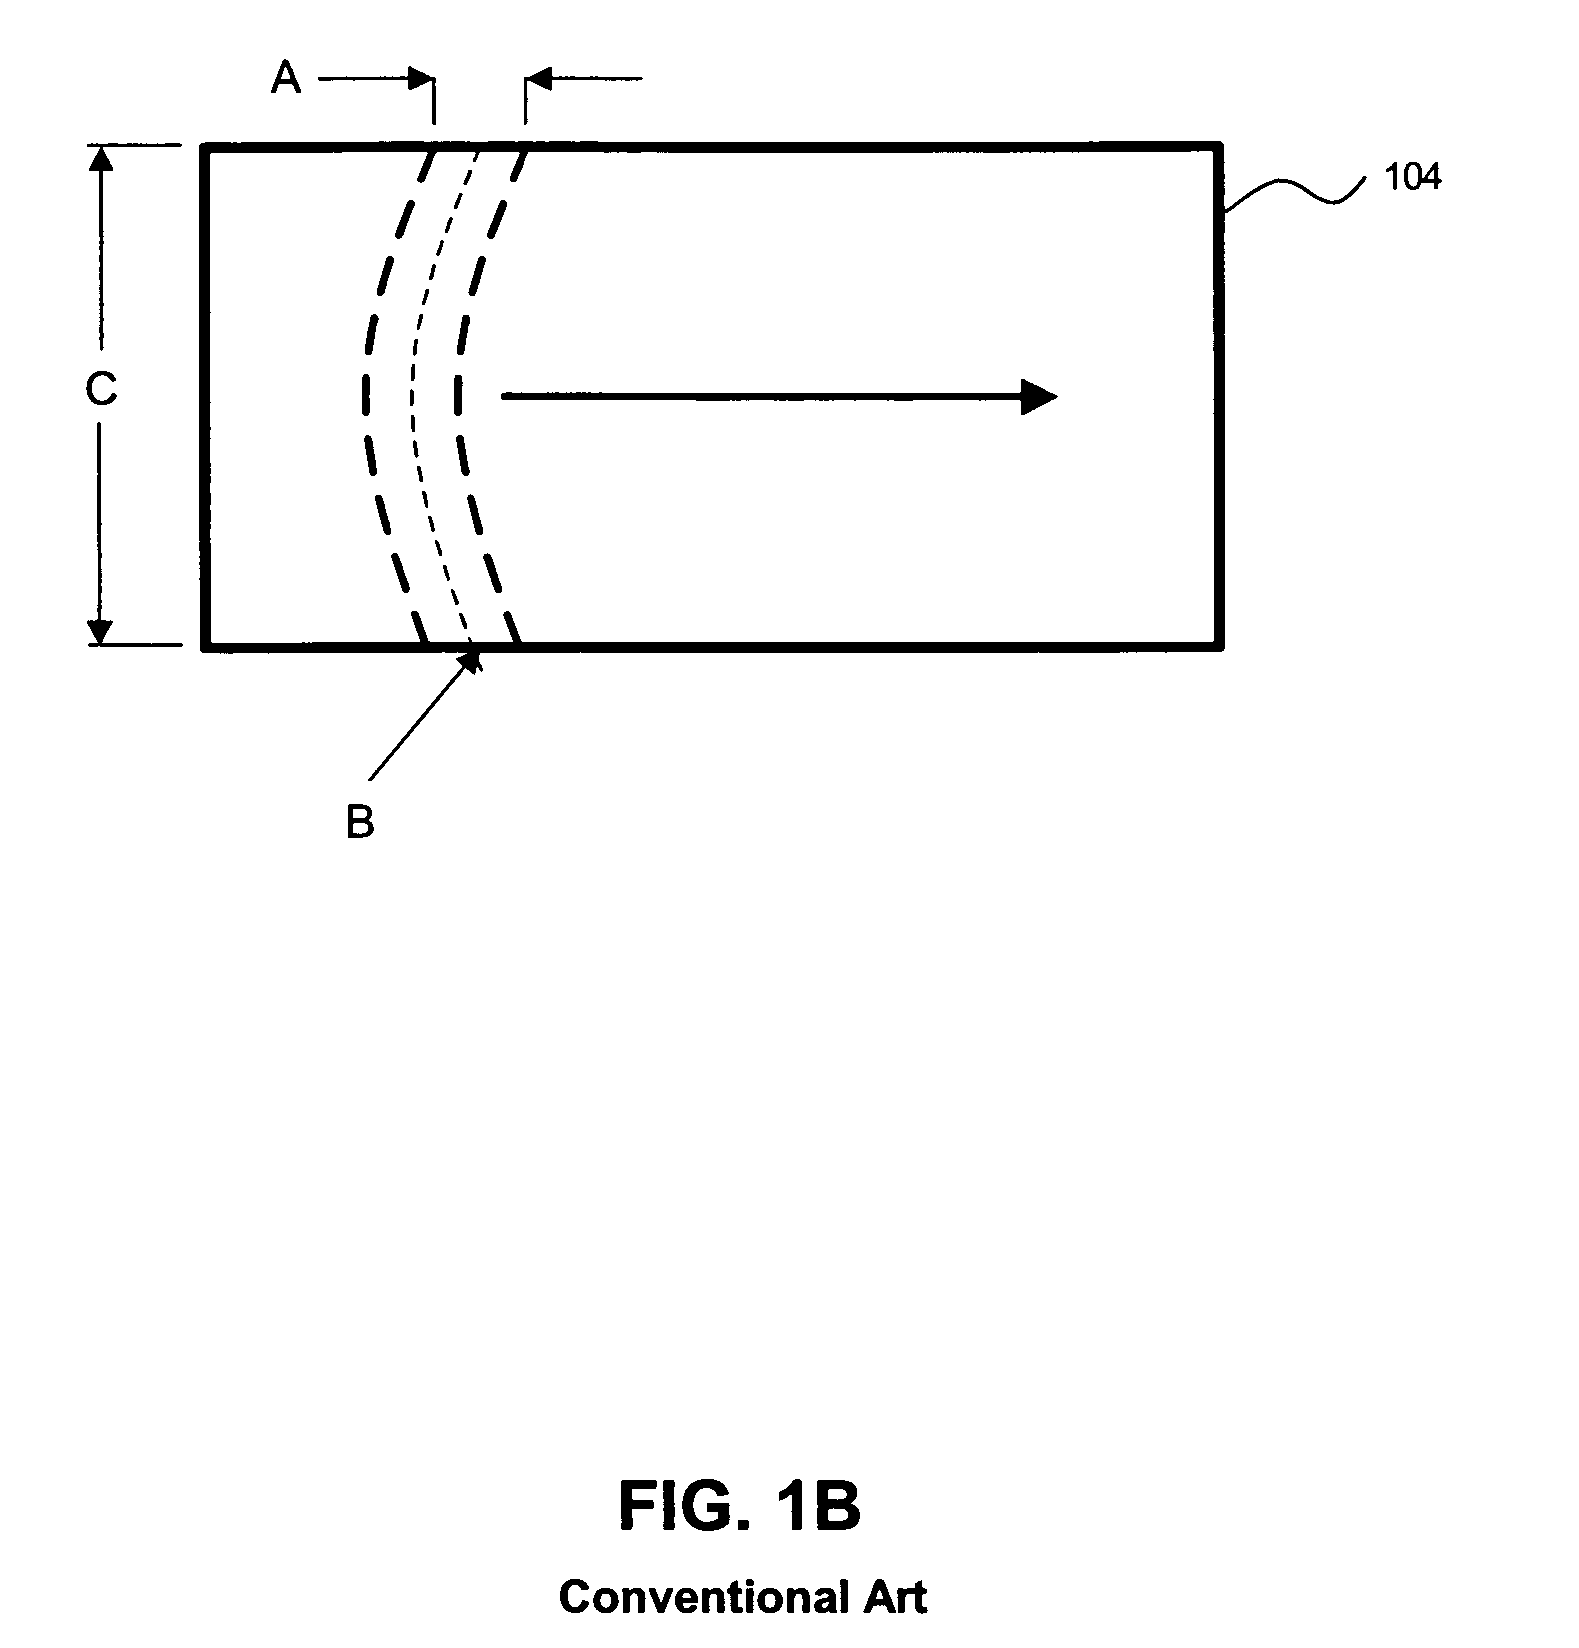 Large field of view protection optical system with aberration correctability for flat panel displays